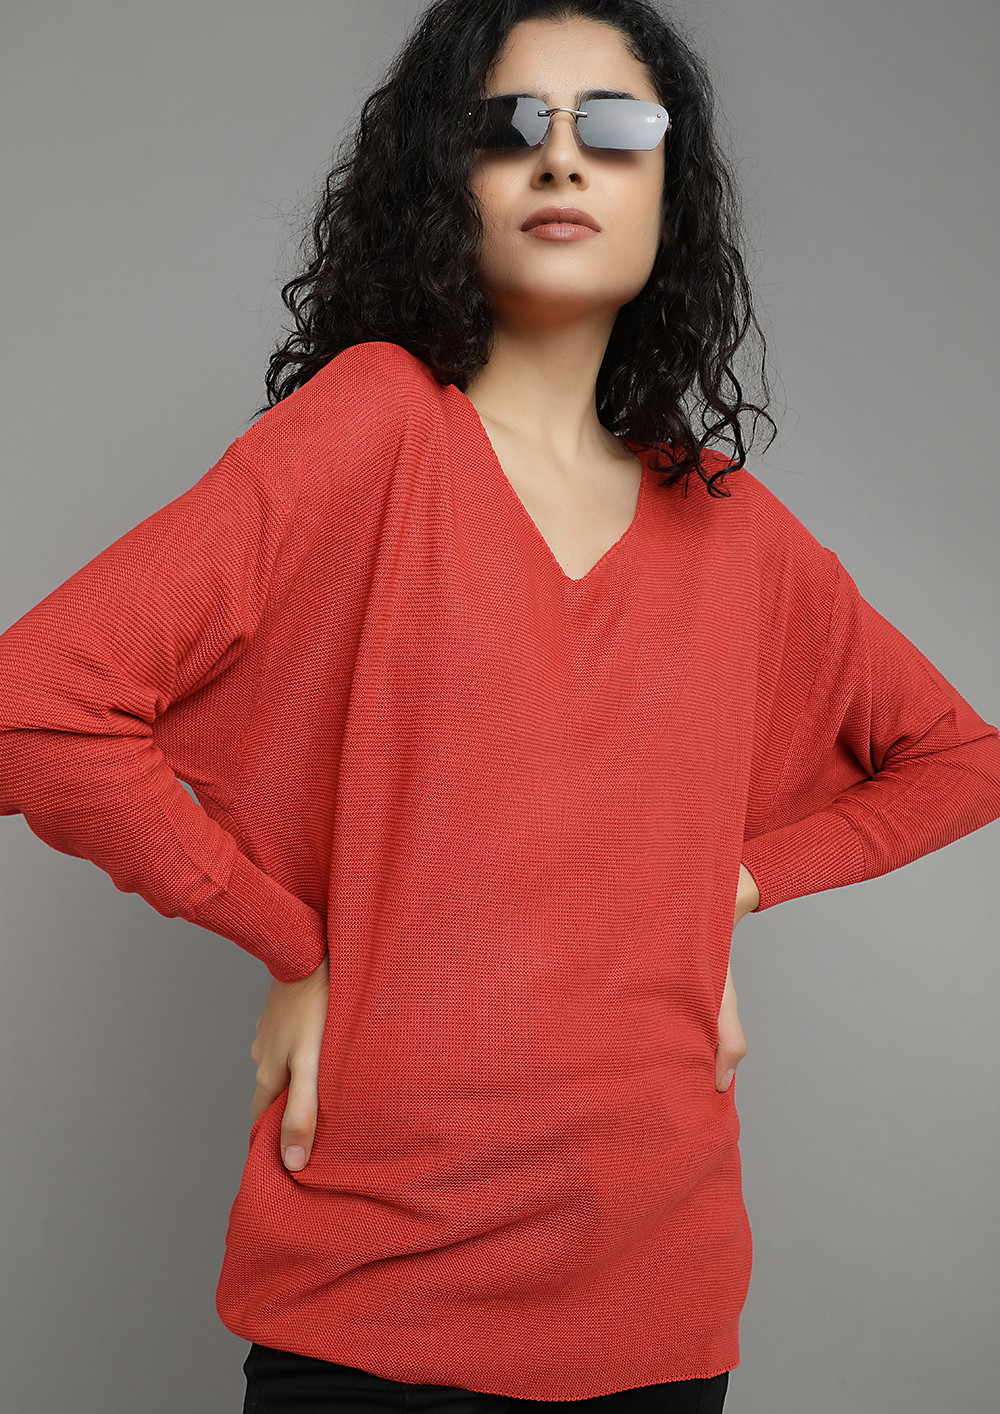 FLYING WITH BATWINGS RED TUNIC TOP